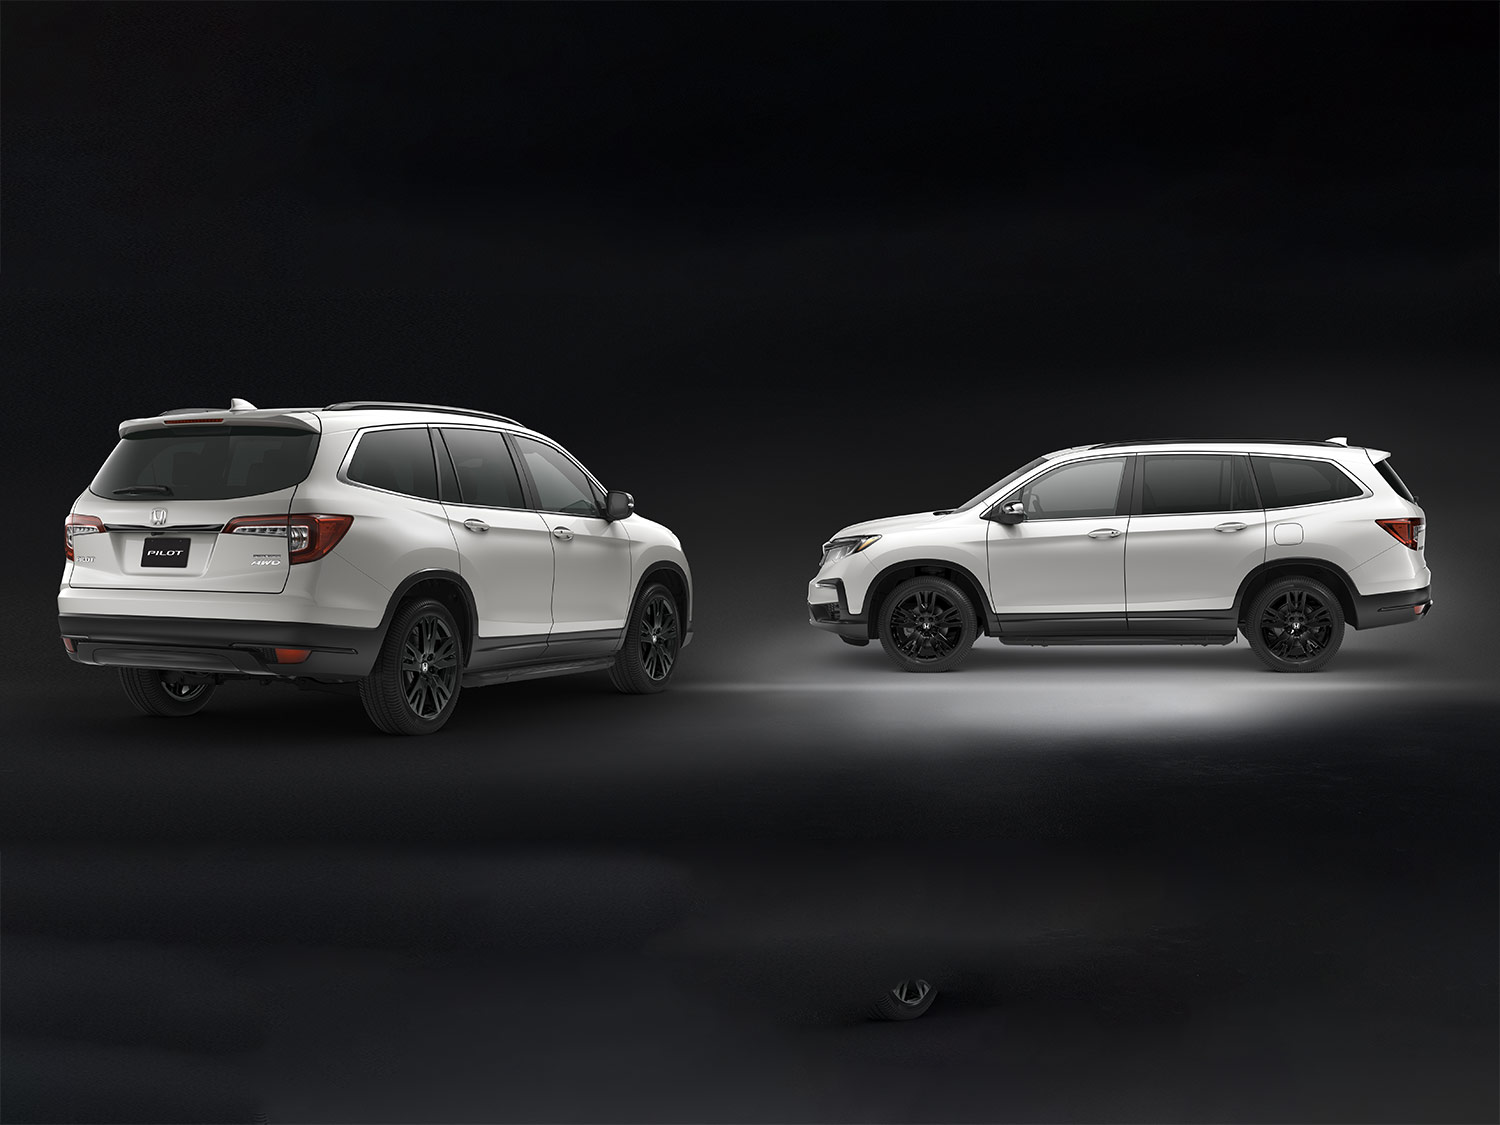 The Honda Pilot Special Edition provides SUV comfort Anywhere & Anytime